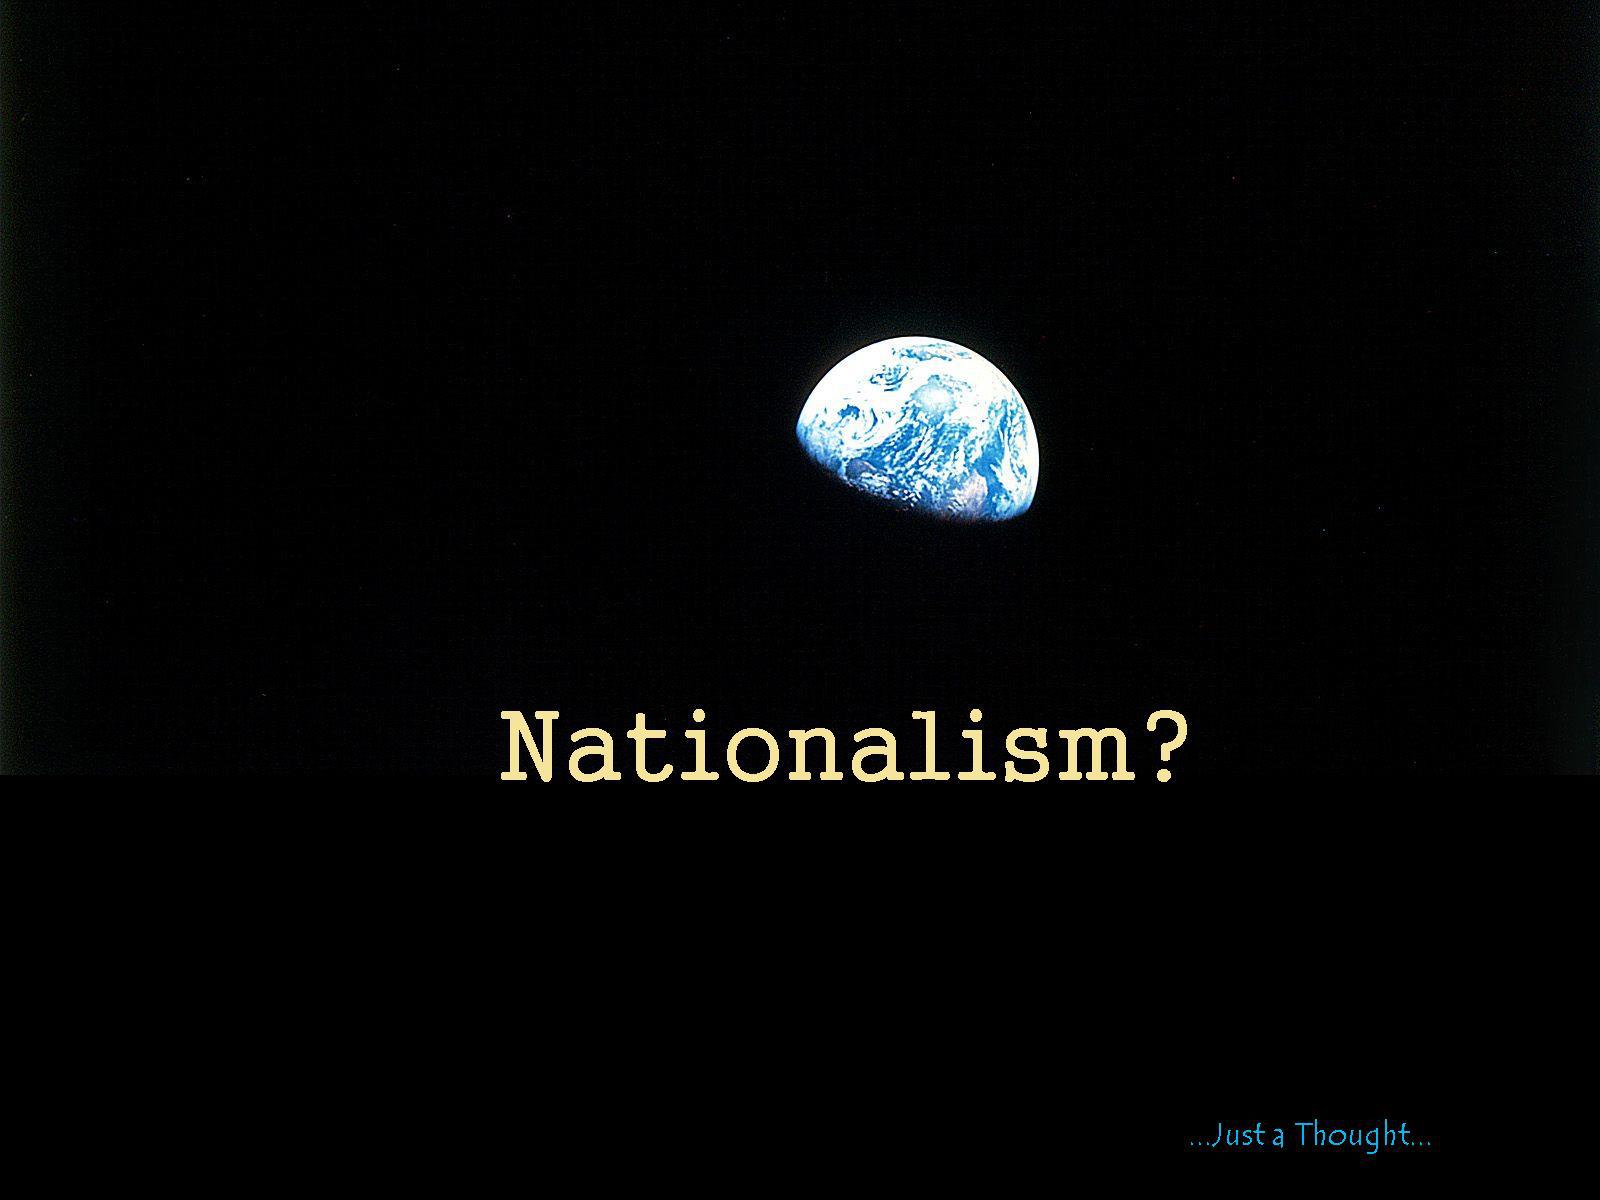 atmosphere - Nationalism? ...Just a Thought..